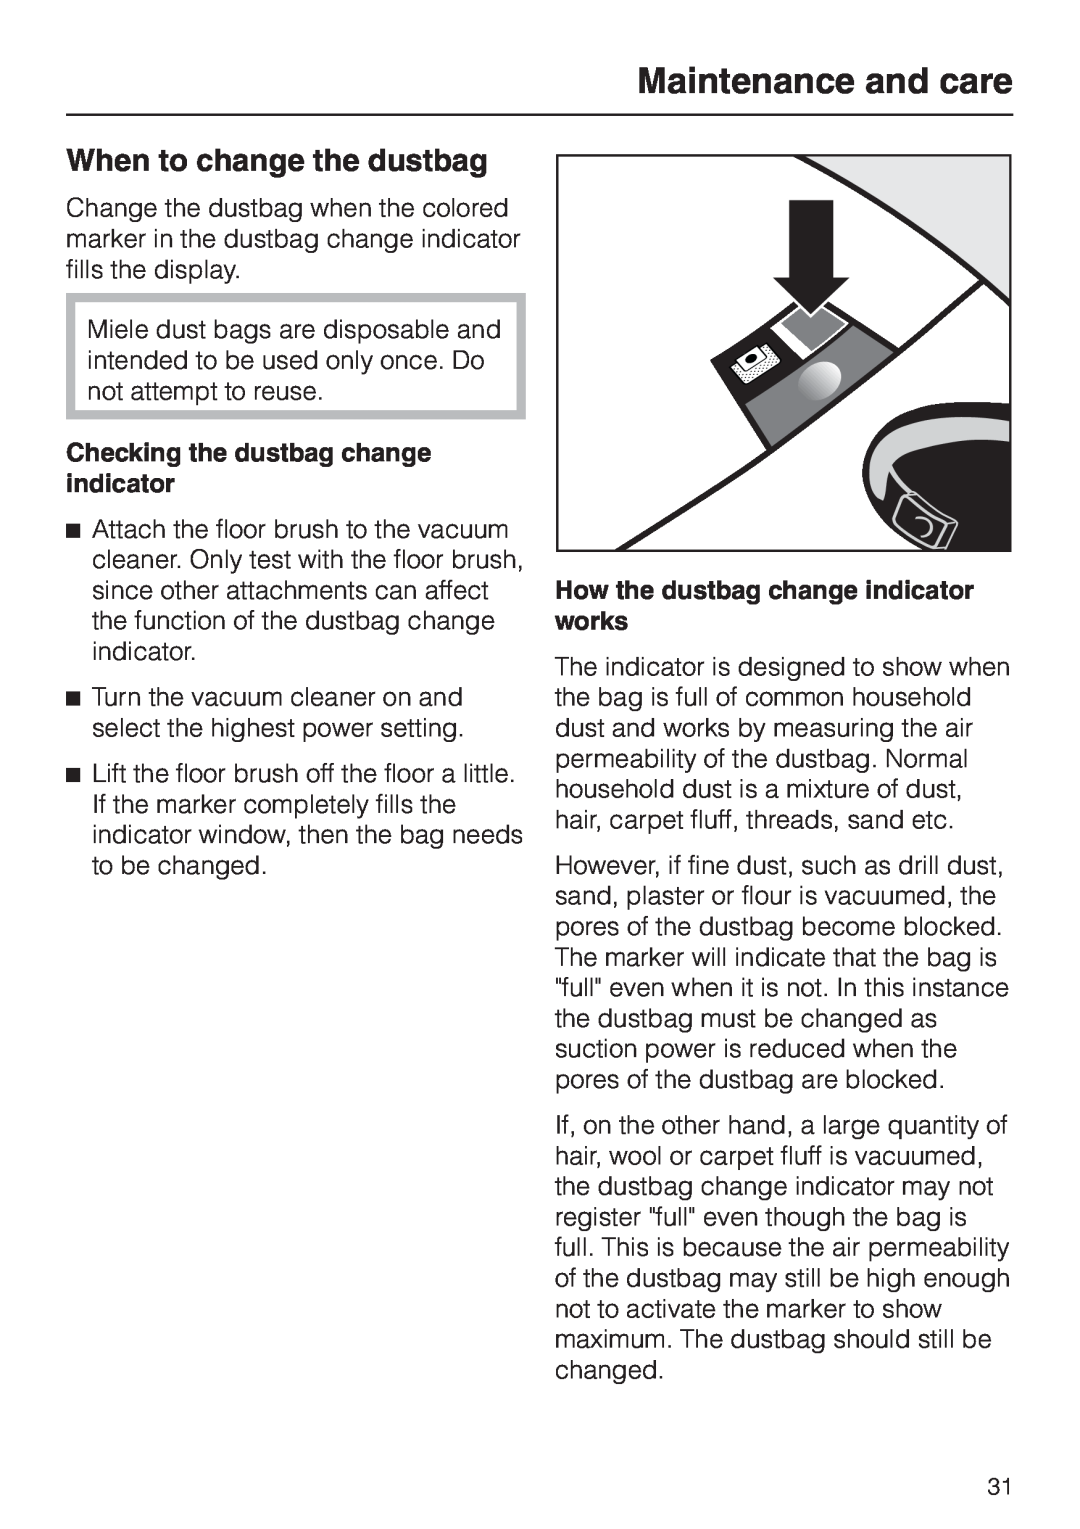 Miele S 658 manual When to change the dustbag, Maintenance and care, Checking the dustbag change indicator 